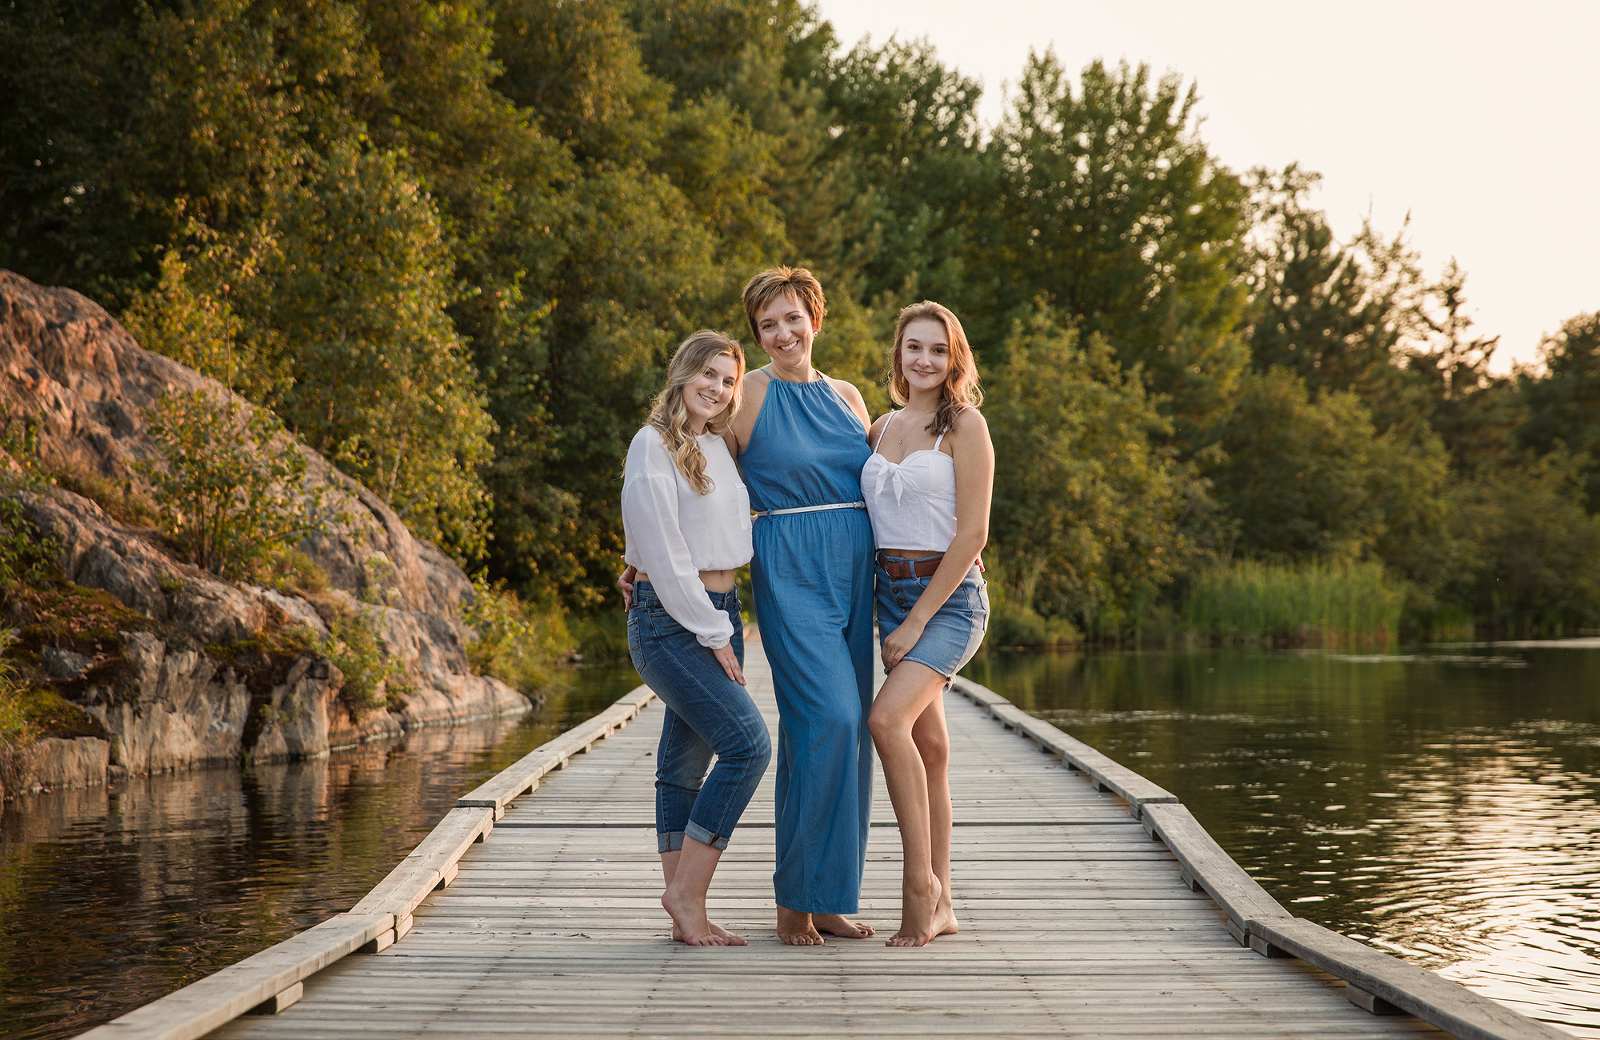 Outdoor portrait session featuring mother and two daughters standing on the dock path in Mallard's Landing park in Sudbury, Ontario. Image by Helga Himer Photography.